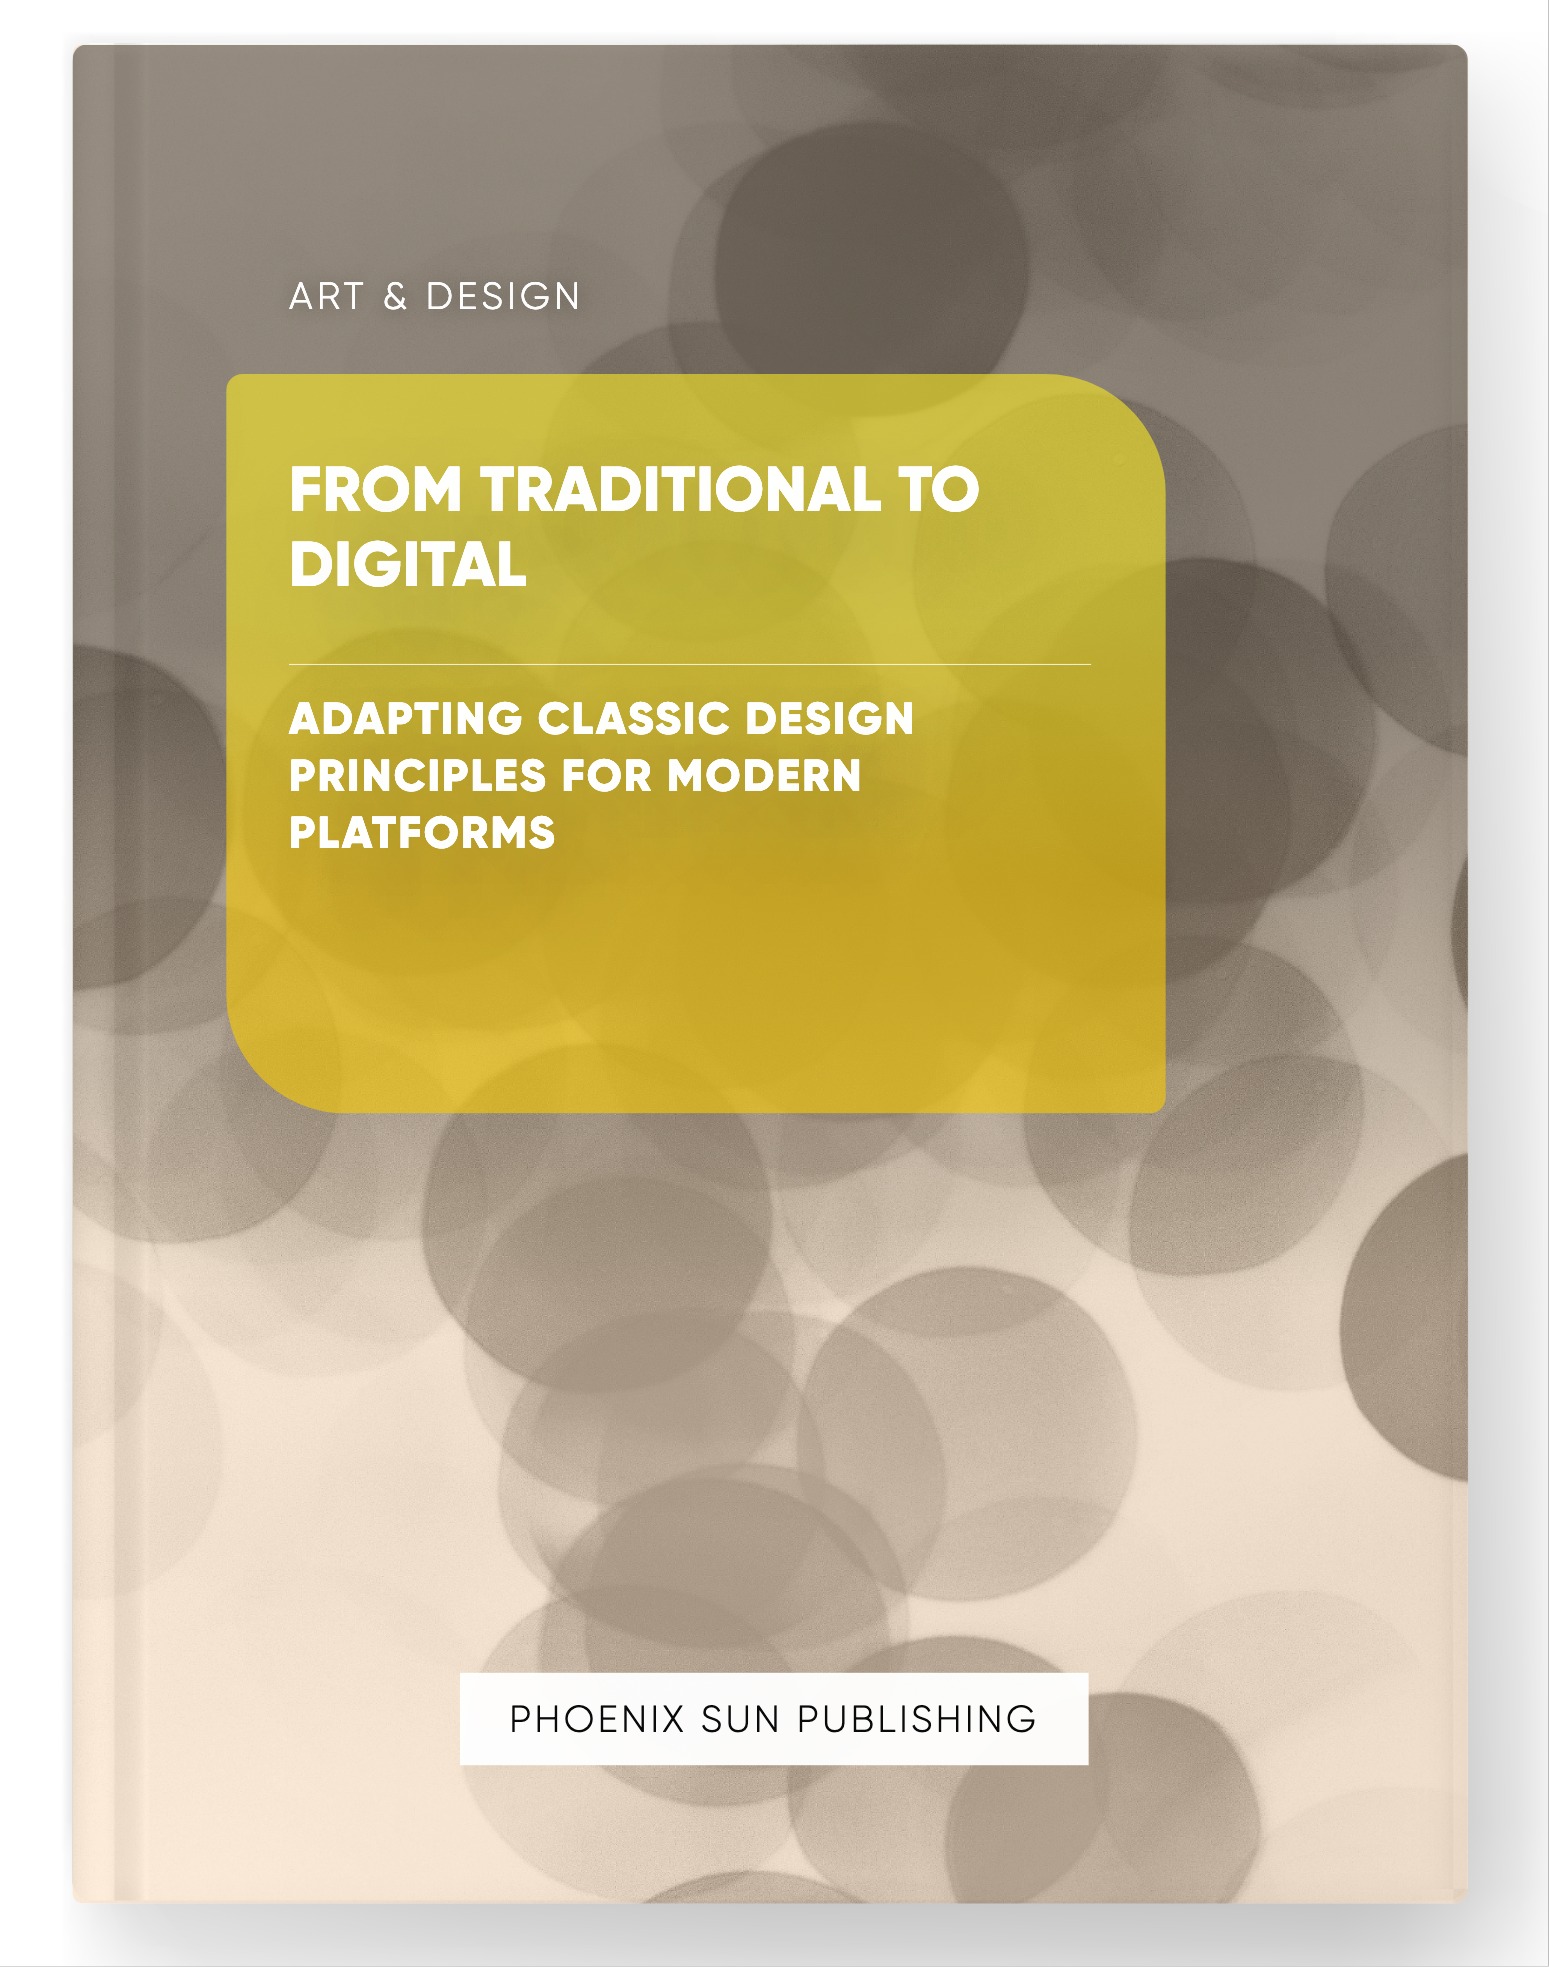 From Traditional to Digital – Adapting Classic Design Principles for Modern Platforms